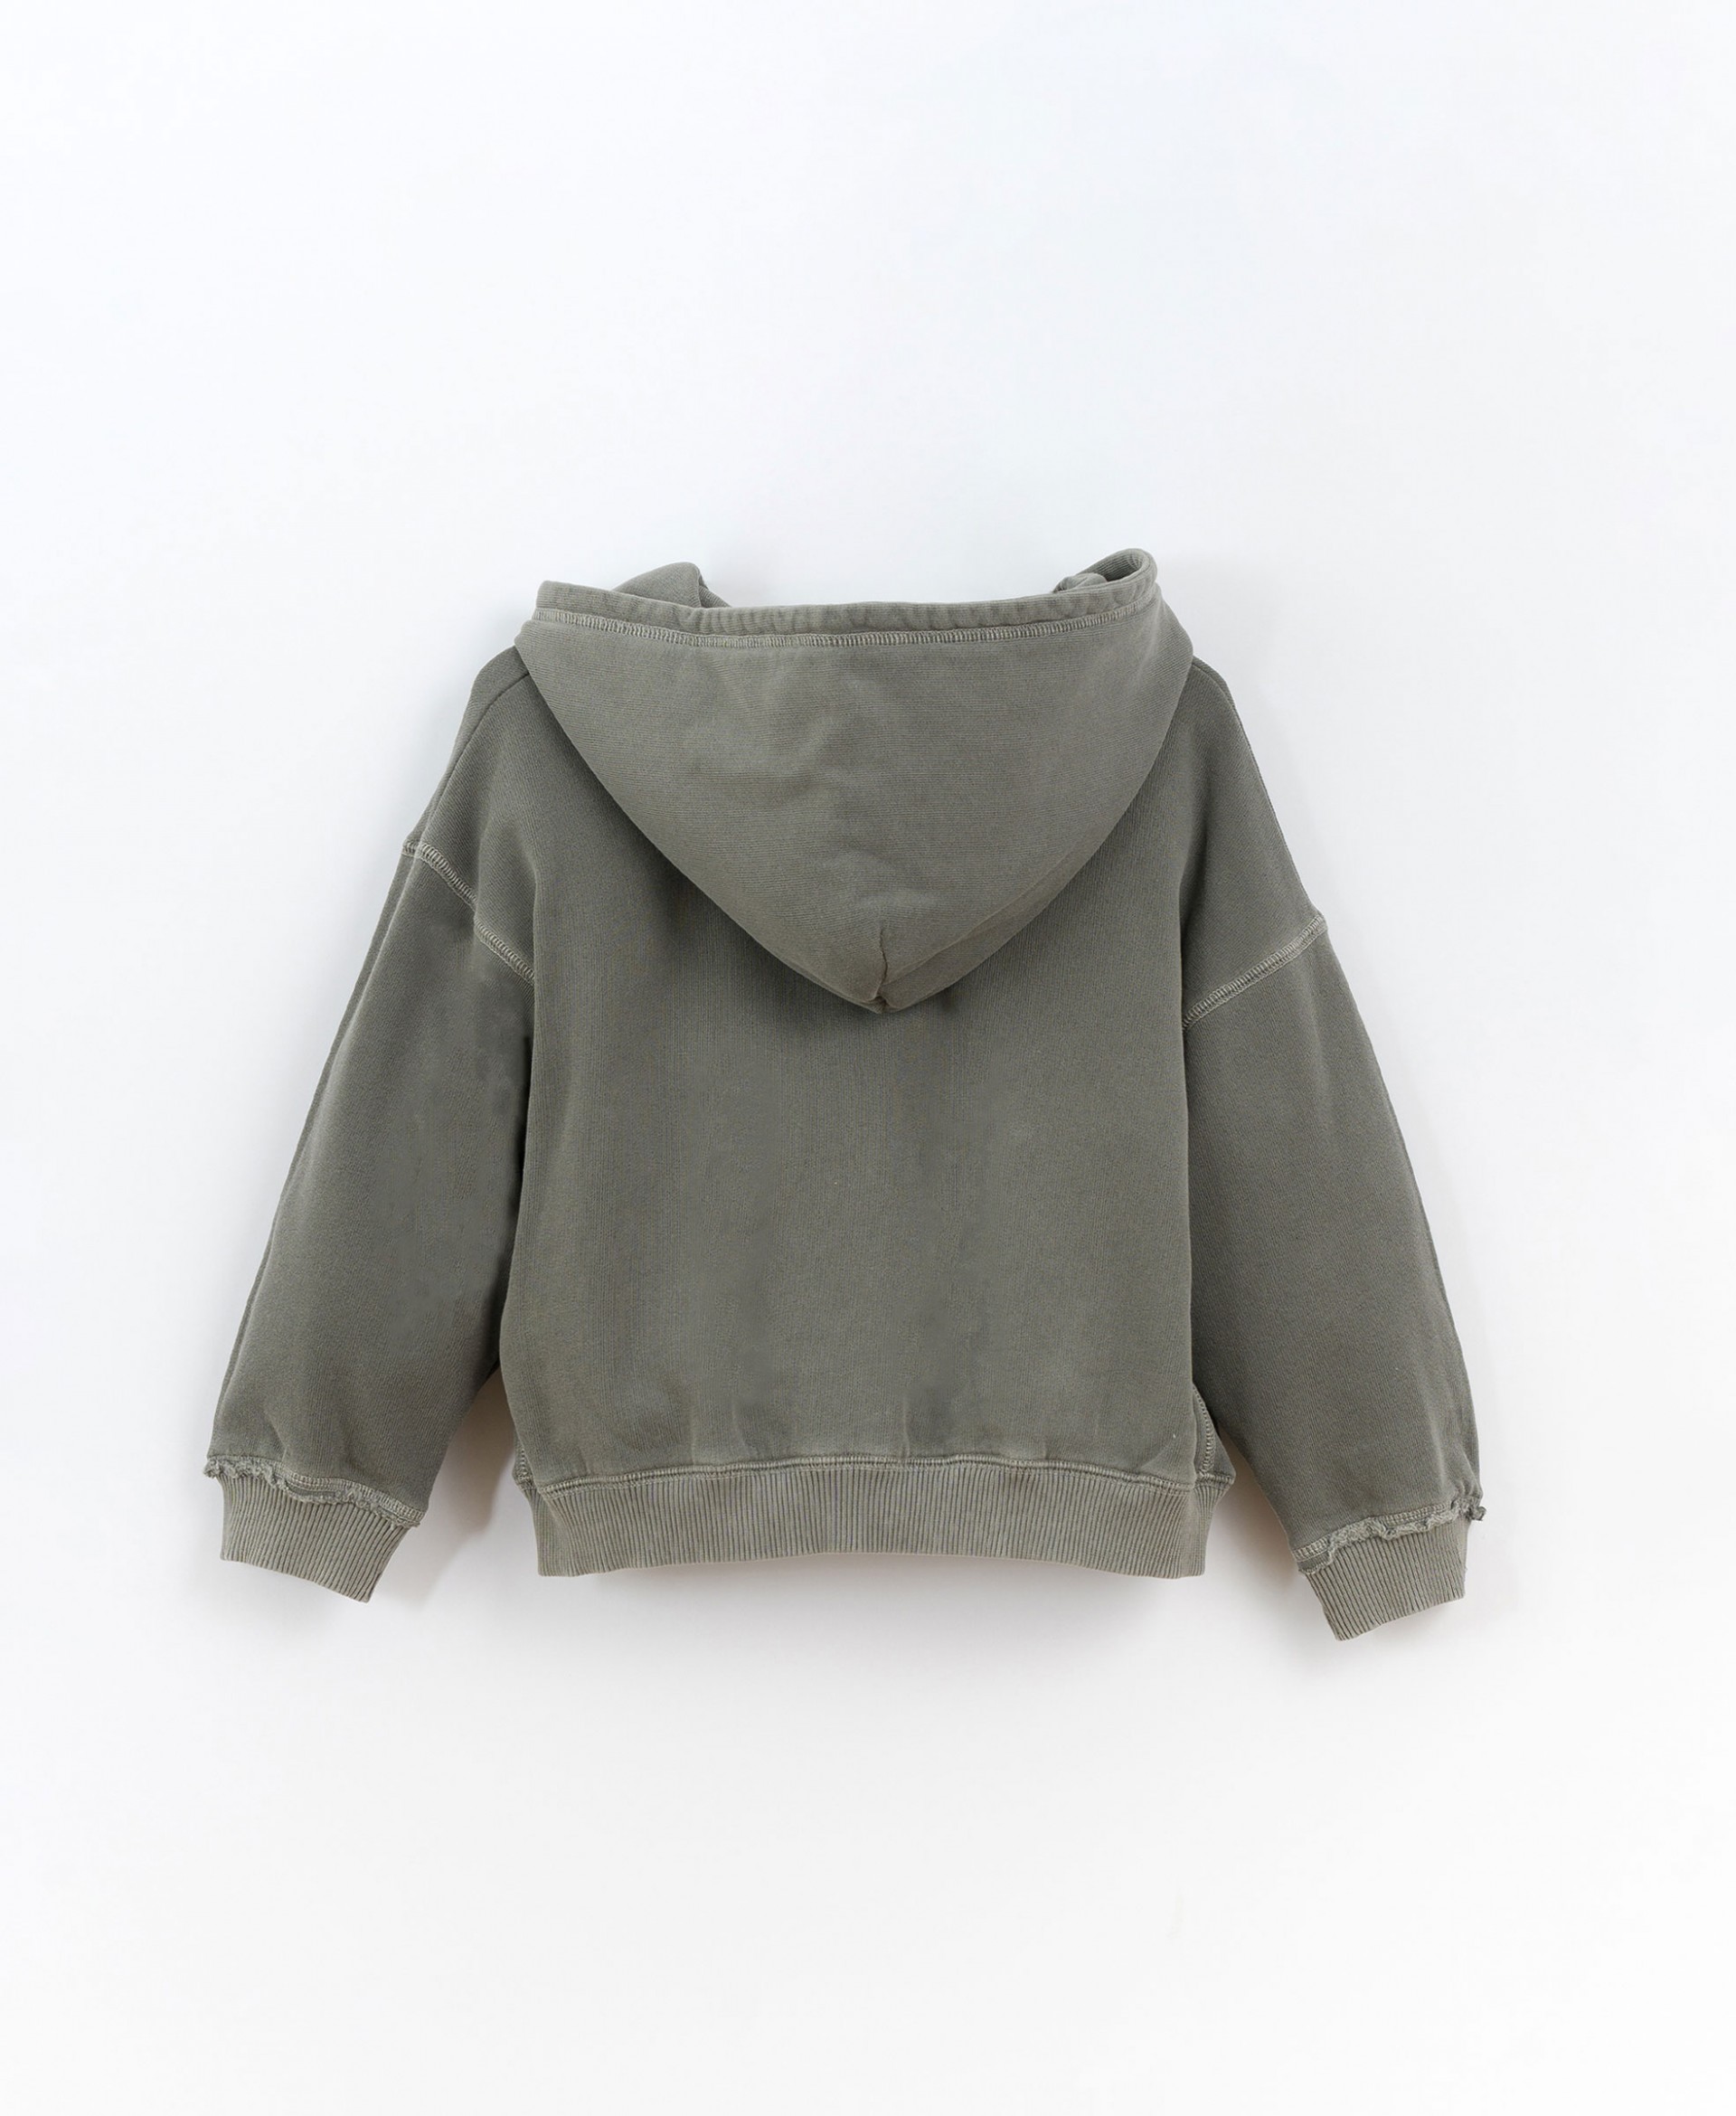 Naturally dyed jacket | Culinary